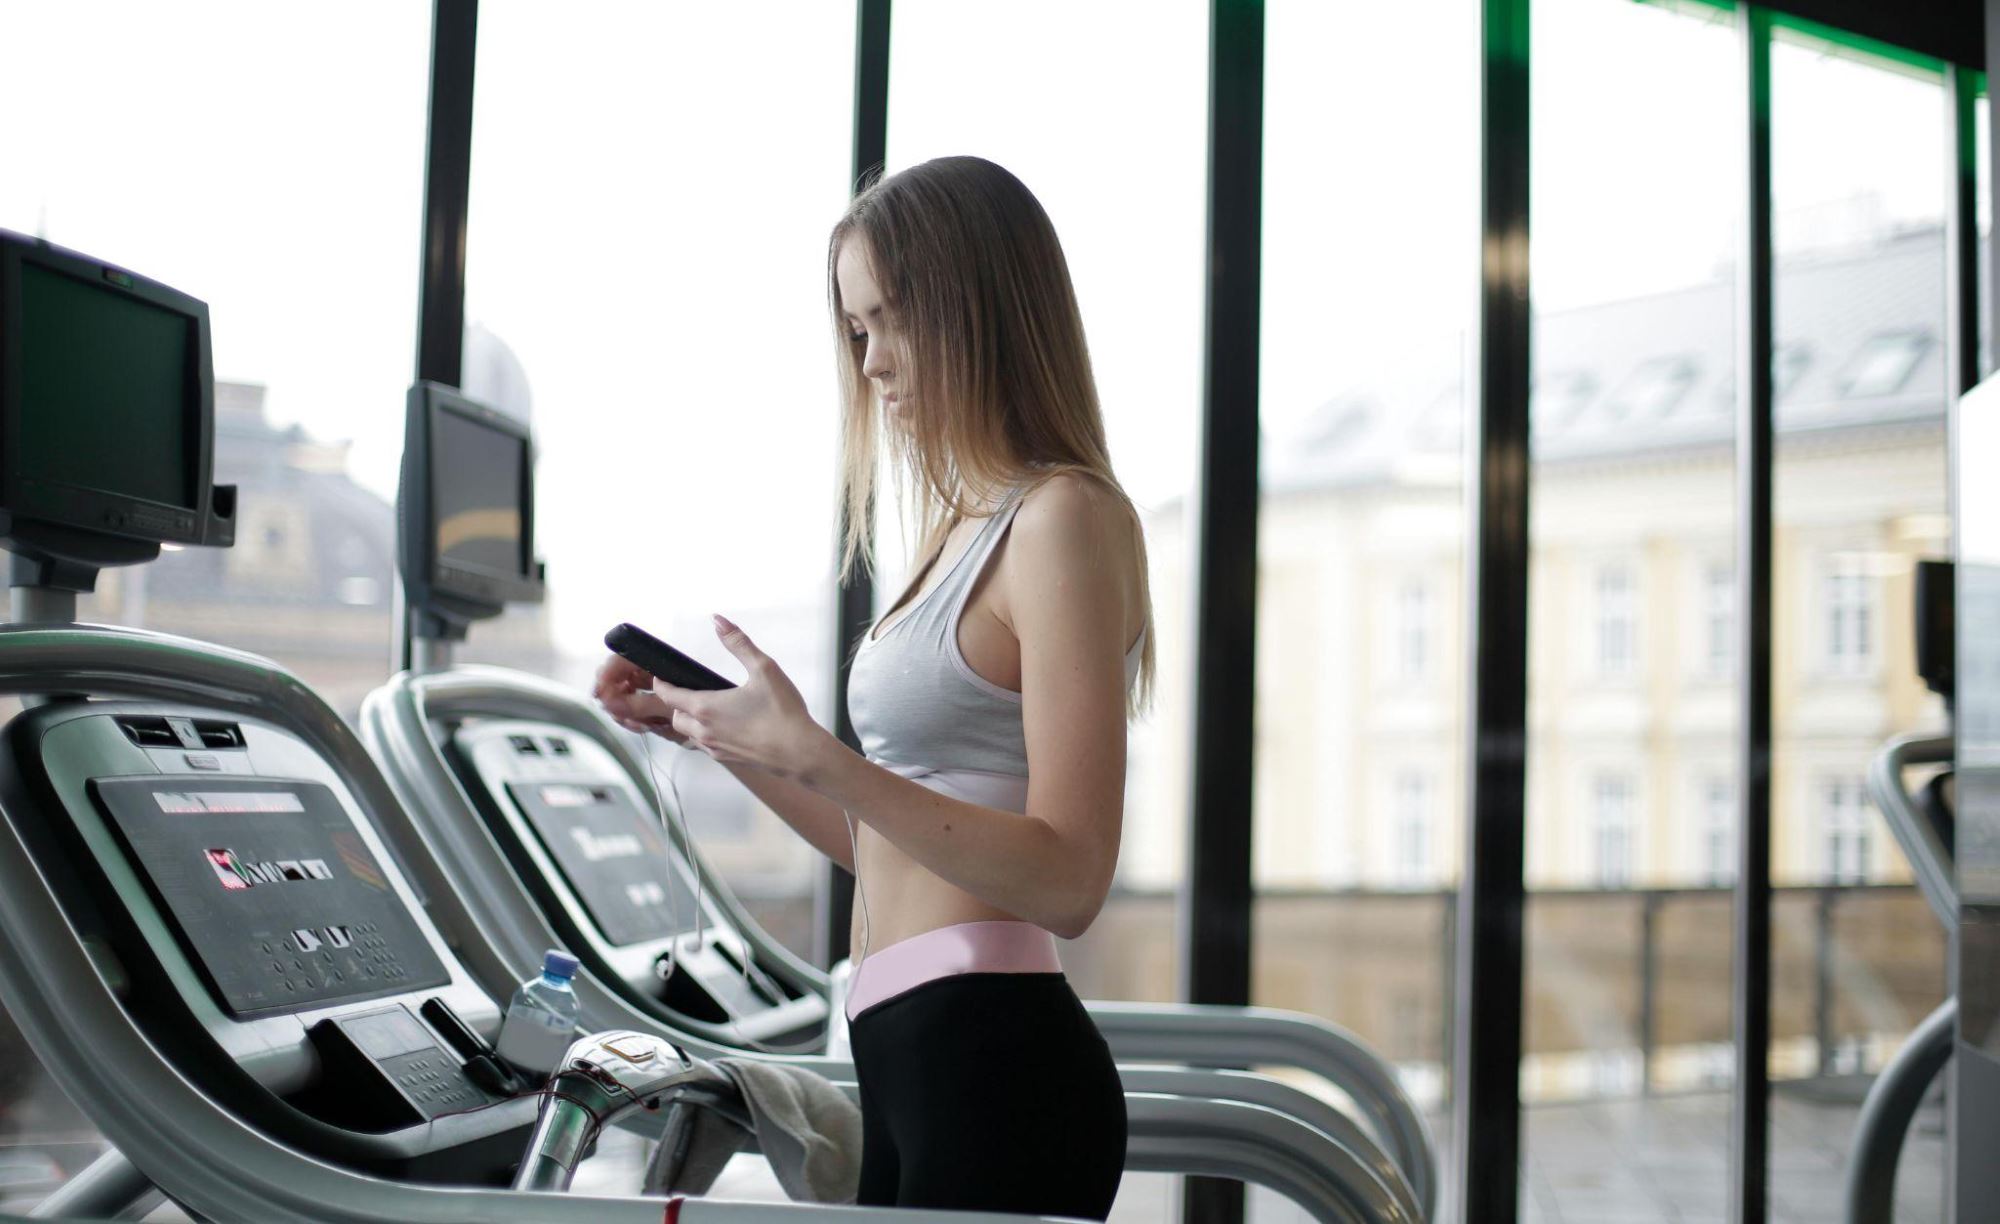 A woman doing a cardio exercise workout at the gym on a treadmill.